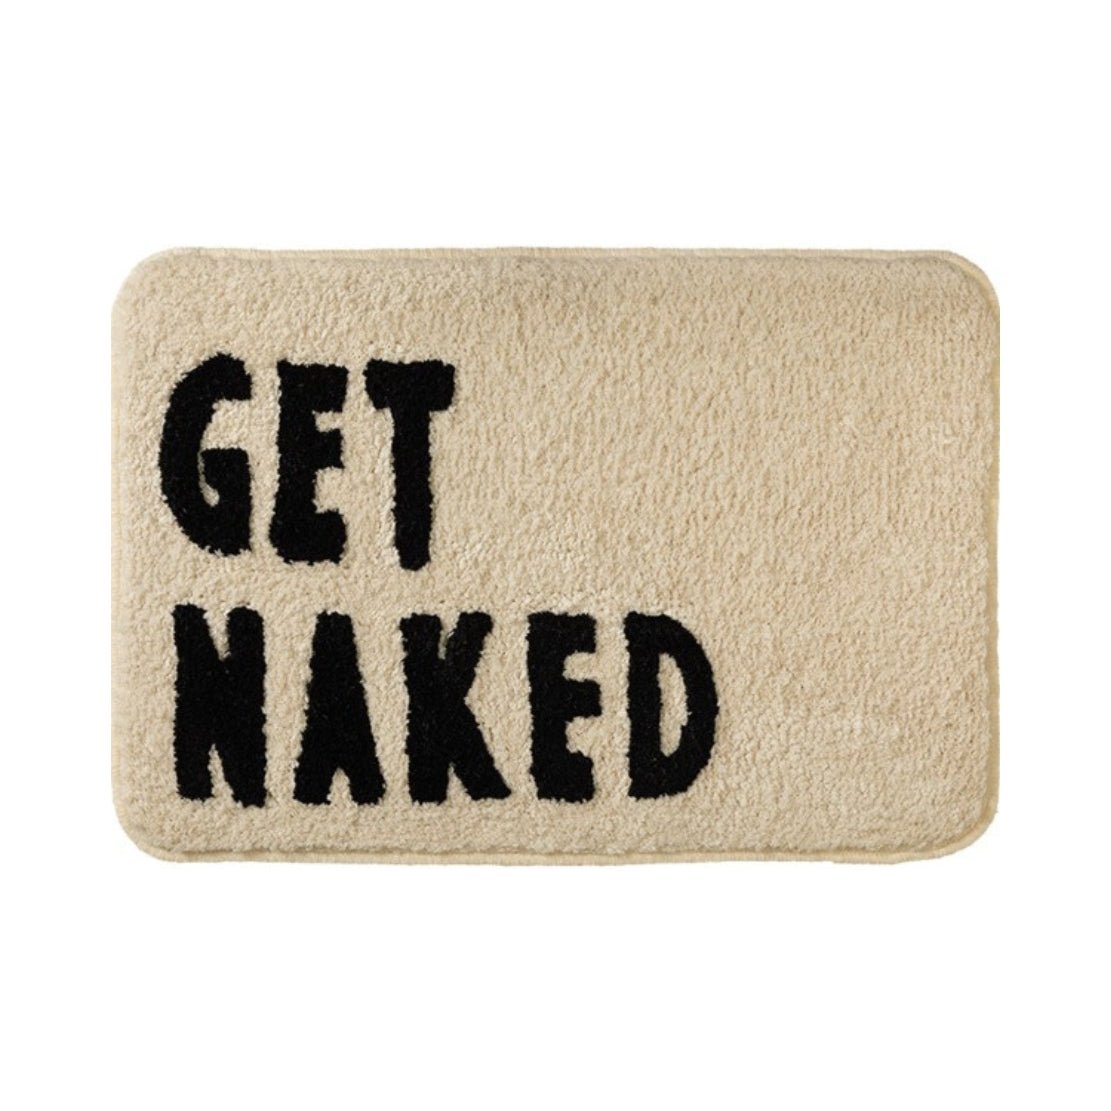 Beige bathmat with black text "Get Naked"